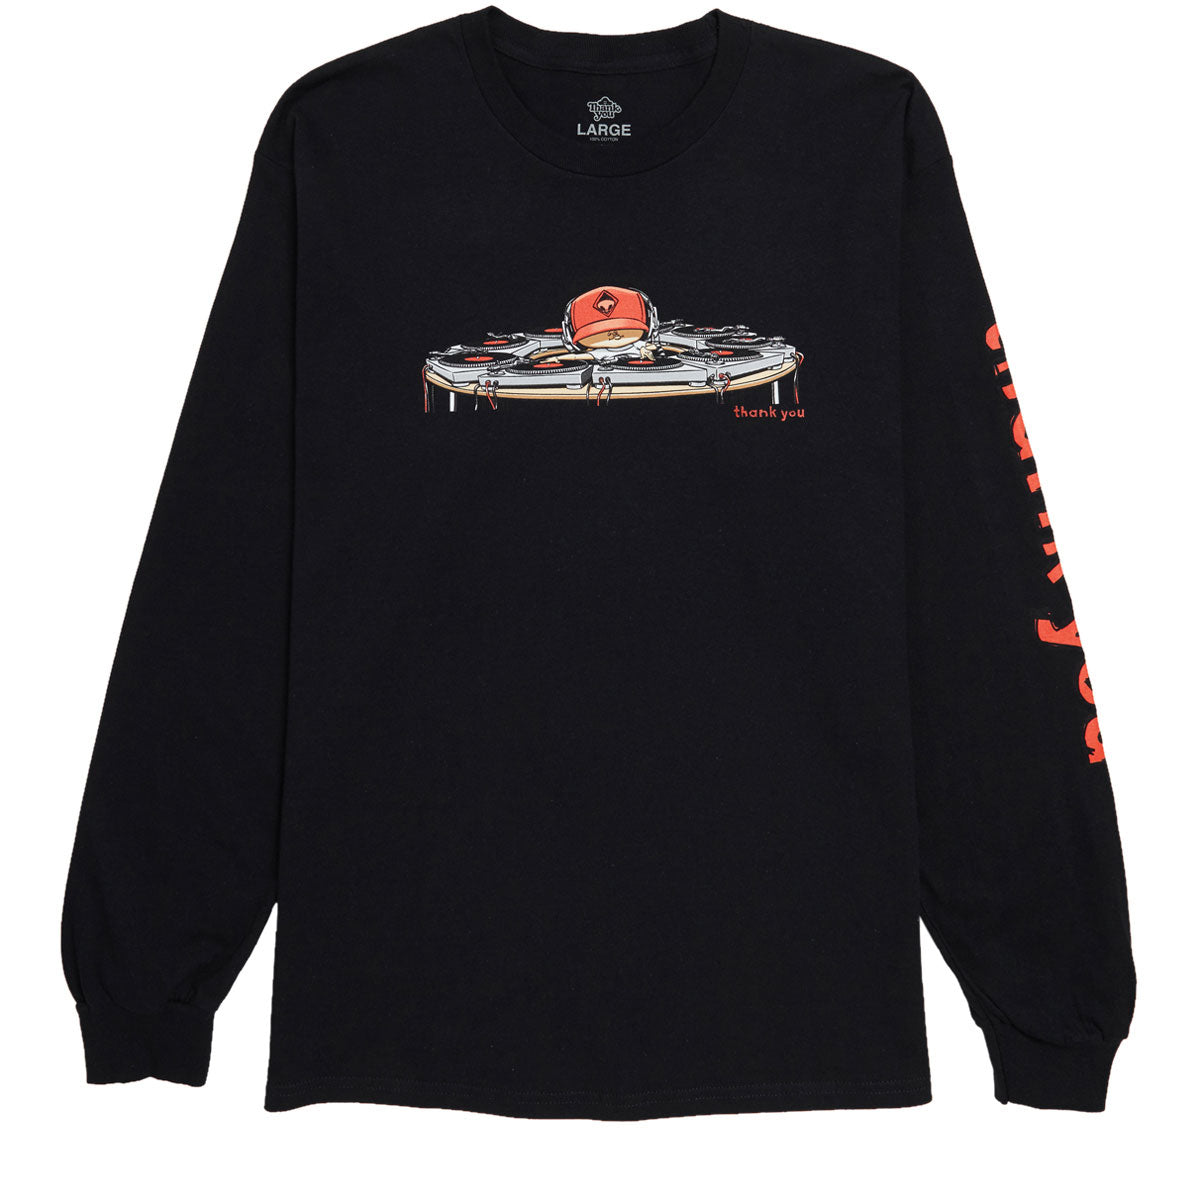 Thank You x Ronnie Creager Mix Master Long Sleeve T-Shirt - Black image 1